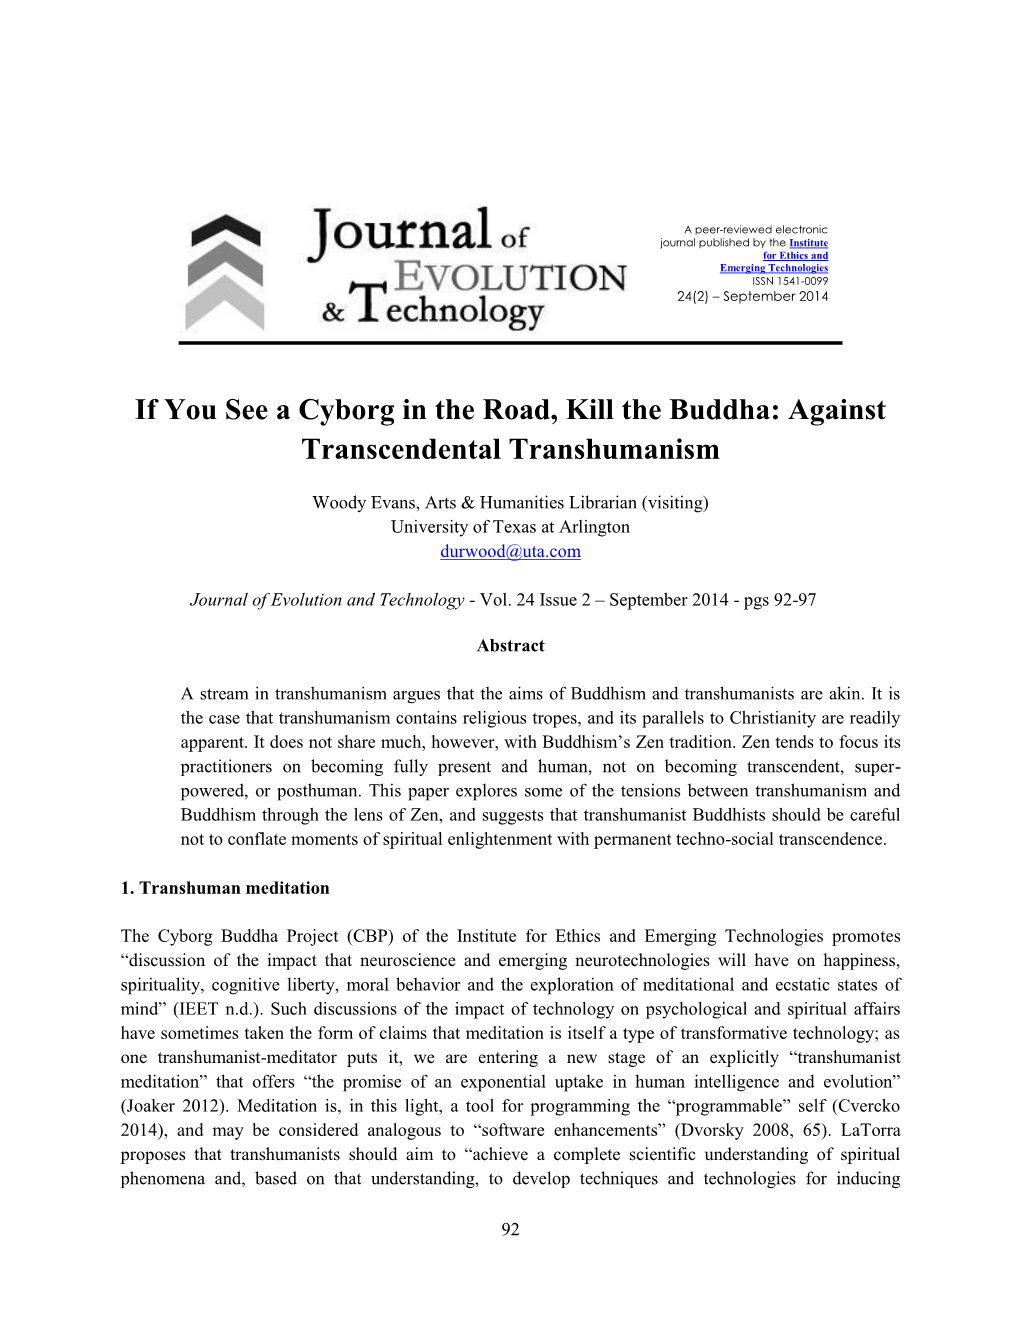 If You See a Cyborg in the Road, Kill the Buddha: Against Transcendental Transhumanism